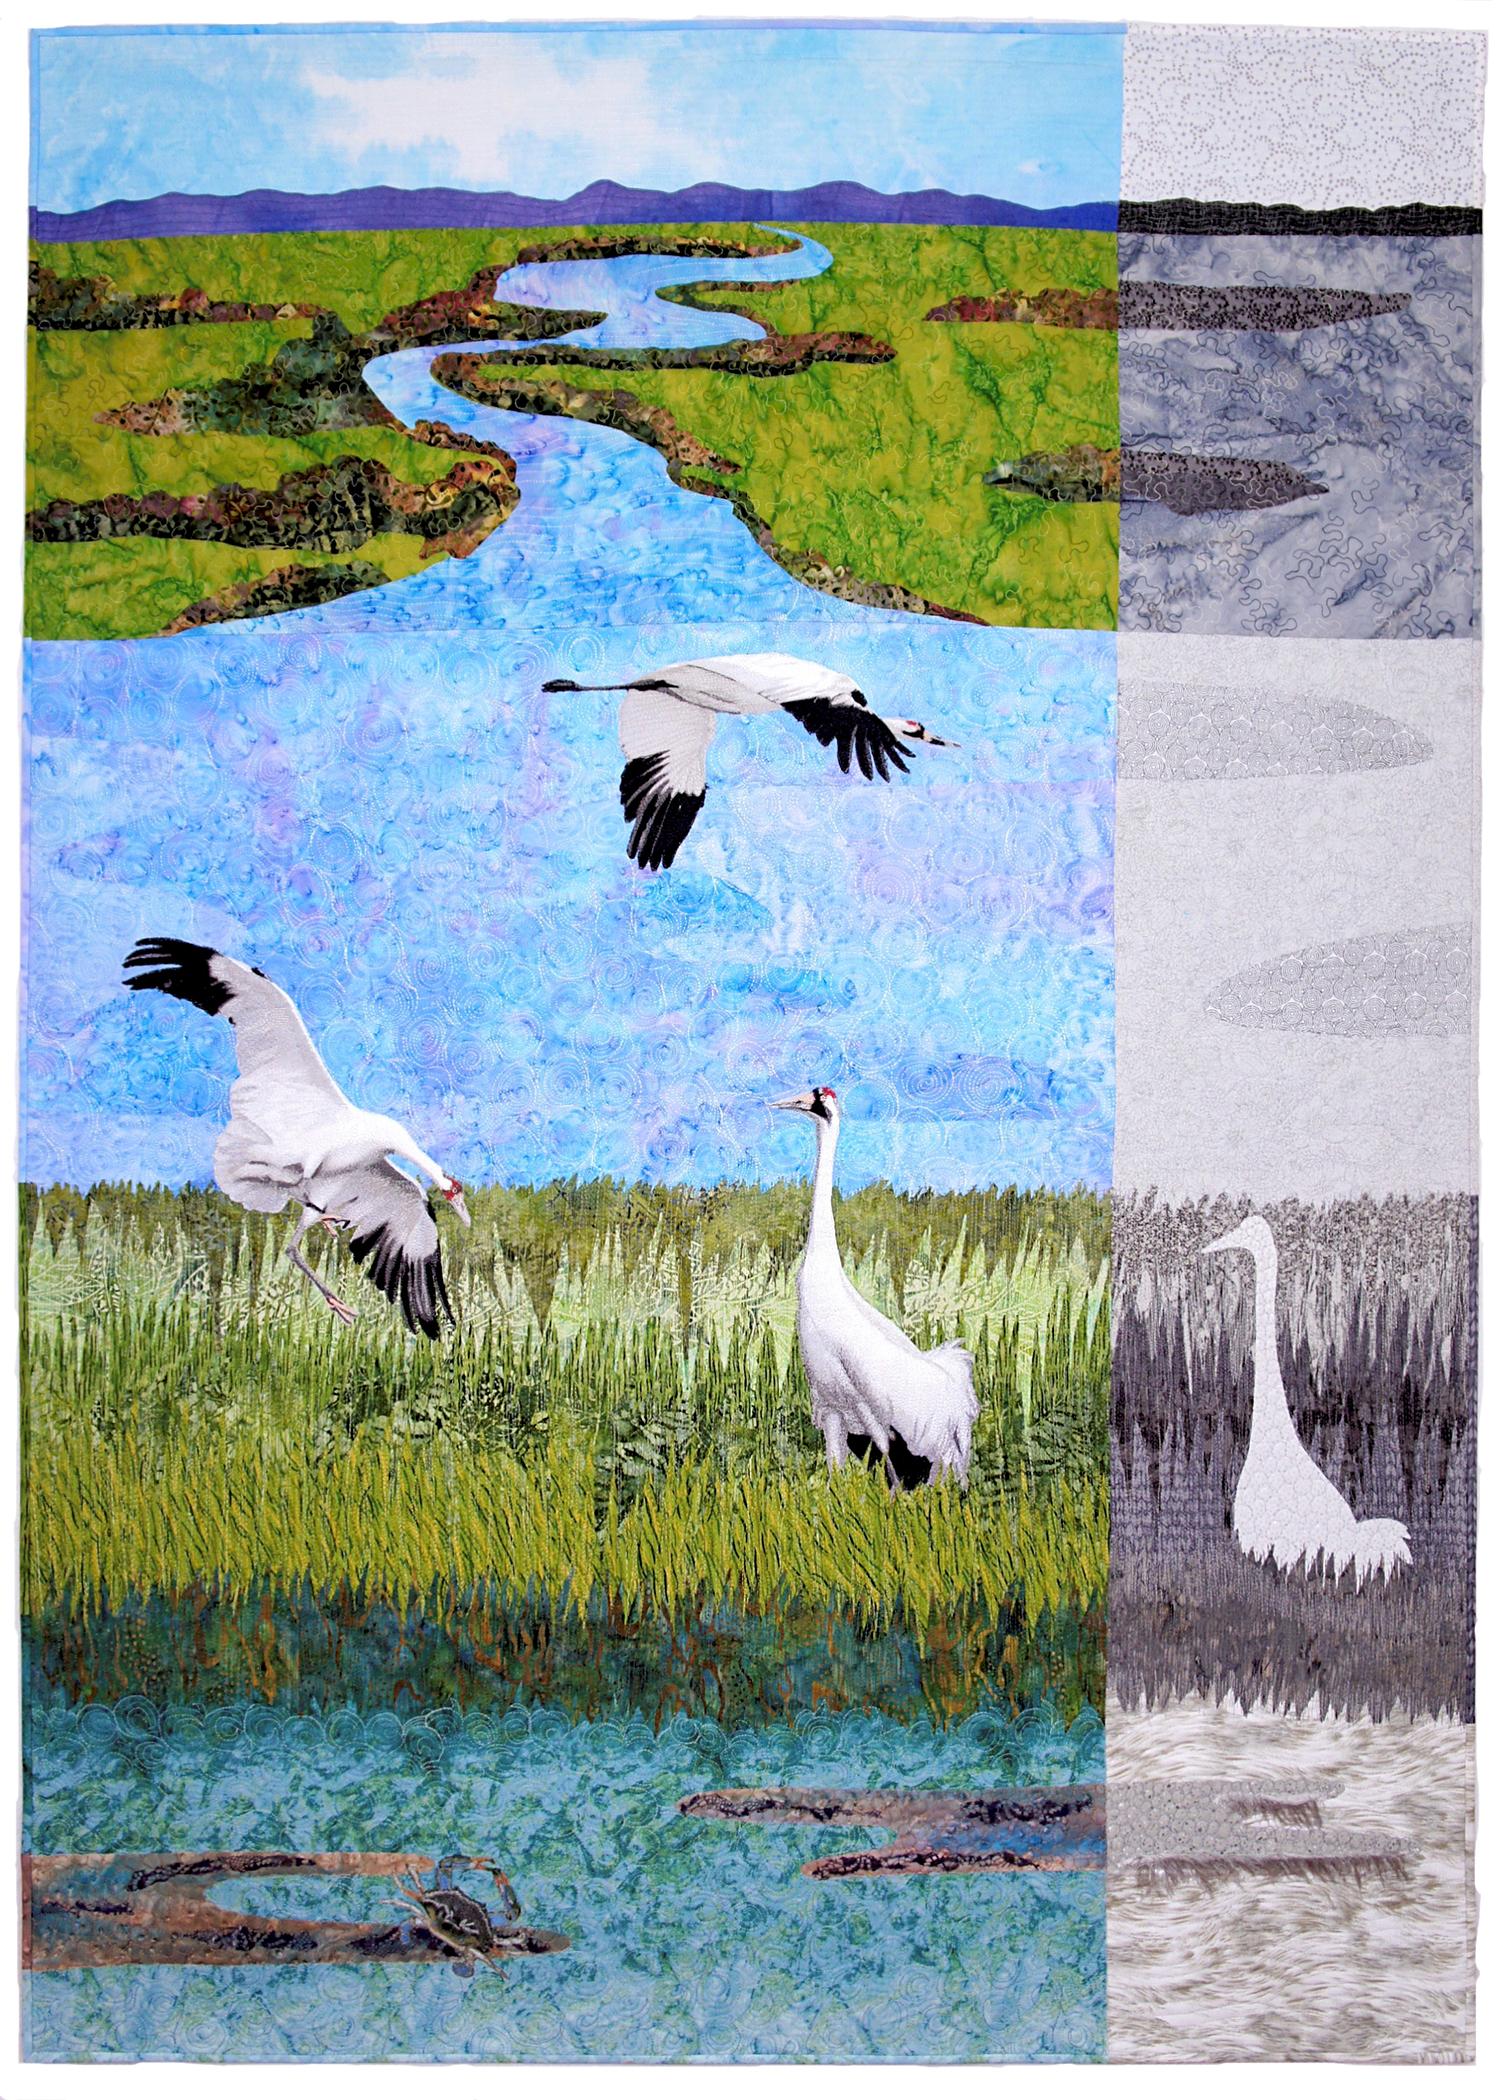 Sara Sharp - Can We Save the Whooping Cranes?